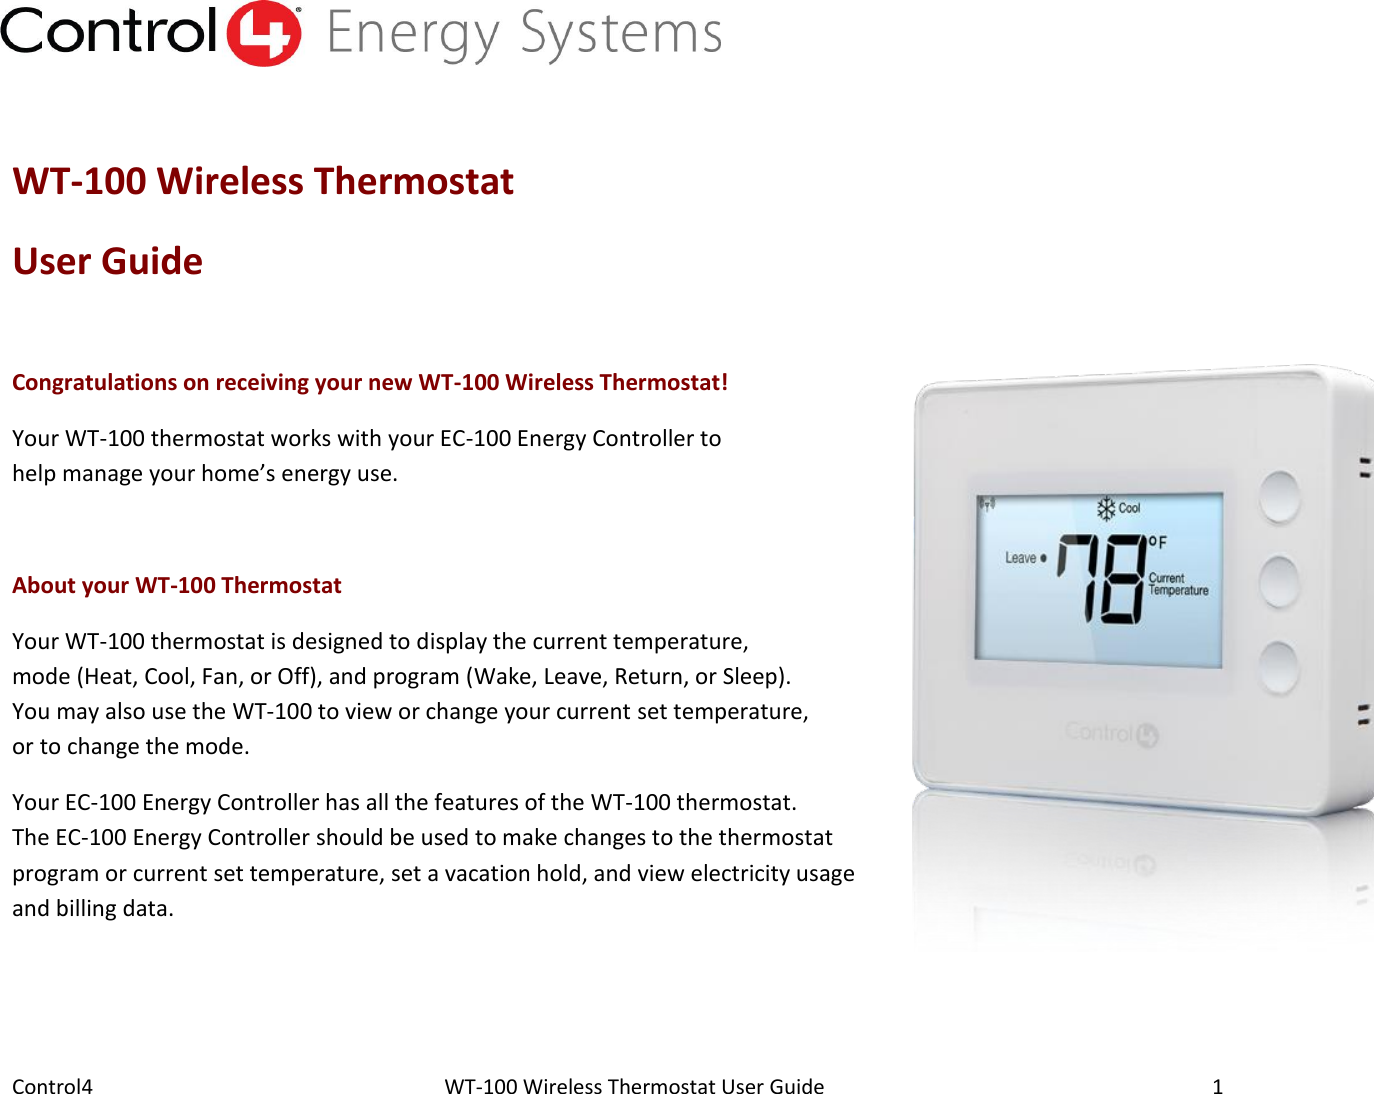 Control4                                                      WT-100 Wireless Thermostat User Guide        1  WT-100 Wireless Thermostat  User Guide  Congratulations on receiving your new WT-100 Wireless Thermostat! Your WT-100 thermostat works with your EC-100 Energy Controller to help manage your home’s energy use.  About your WT-100 Thermostat  Your WT-100 thermostat is designed to display the current temperature, mode (Heat, Cool, Fan, or Off), and program (Wake, Leave, Return, or Sleep). You may also use the WT-100 to view or change your current set temperature, or to change the mode. Your EC-100 Energy Controller has all the features of the WT-100 thermostat. The EC-100 Energy Controller should be used to make changes to the thermostat program or current set temperature, set a vacation hold, and view electricity usage and billing data.  